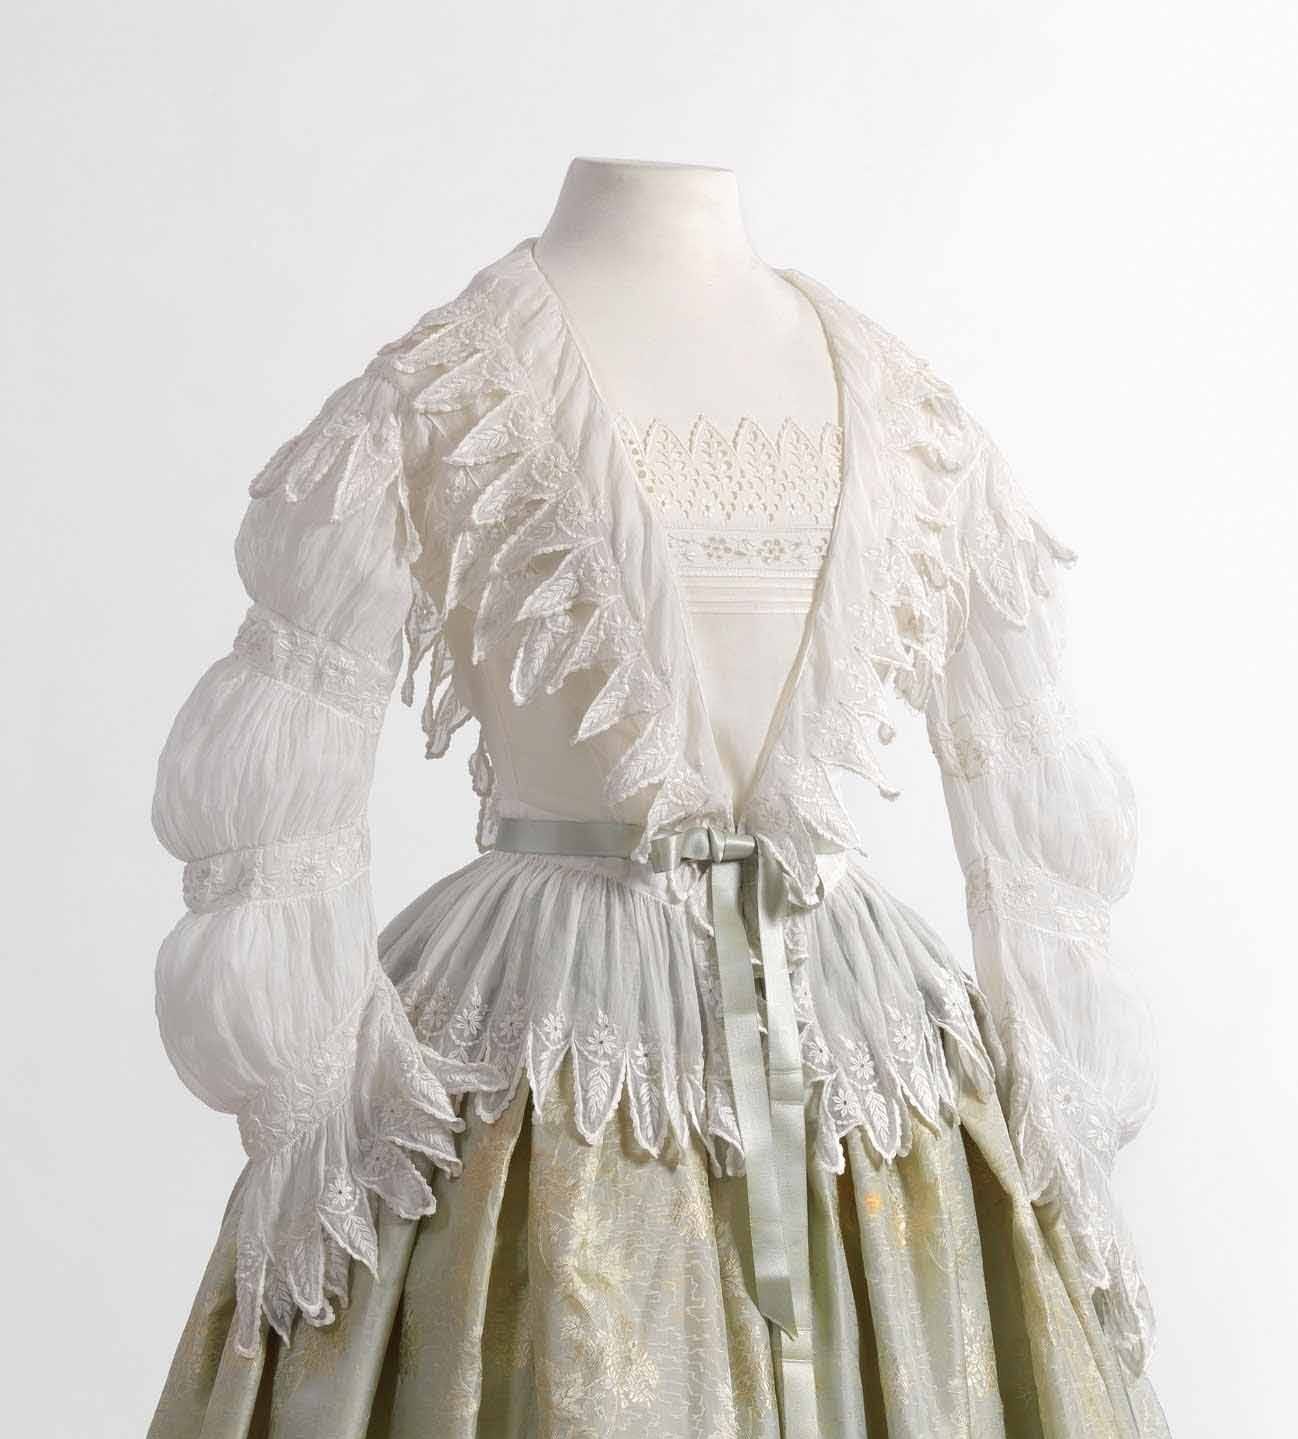 https://upload.wikimedia.org/wikipedia/commons/5/52/Morning_blouse_%28matinee%29_in_white_cambric%2C_decorated_with_embroidery%2C_1850-1855.jpg